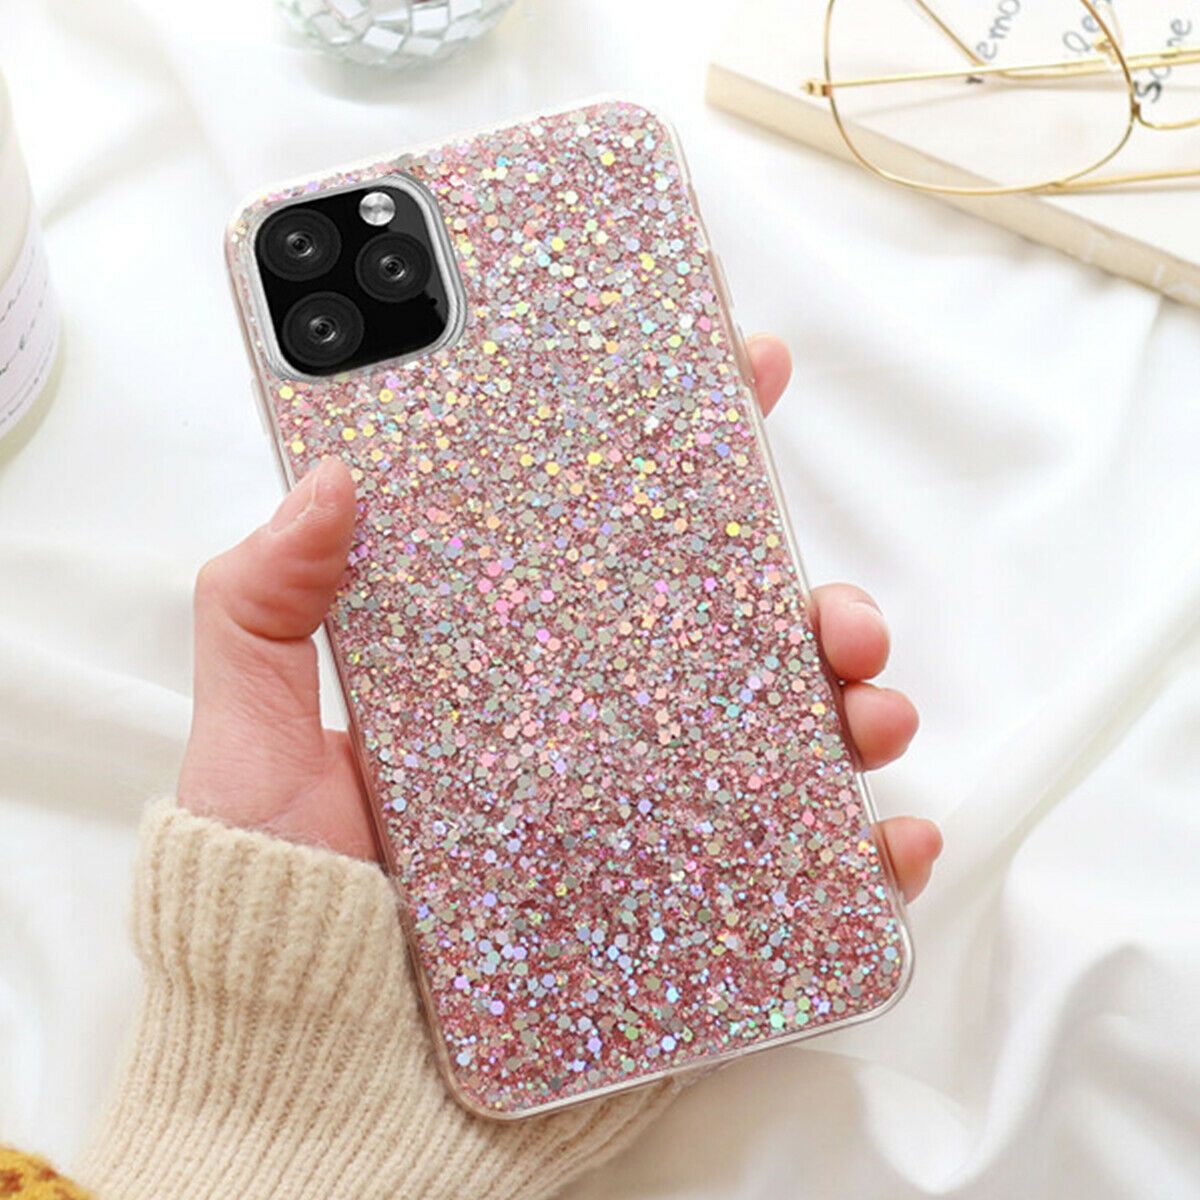 For Iphone 11 Pro Max 8 Plus 7 XS Max XR Cute Bling Glitter Girls Women Case Cover casedeal2000 For Apple iPhone 11 Pro Max Pink (Bling Back & Clear Bumper) 